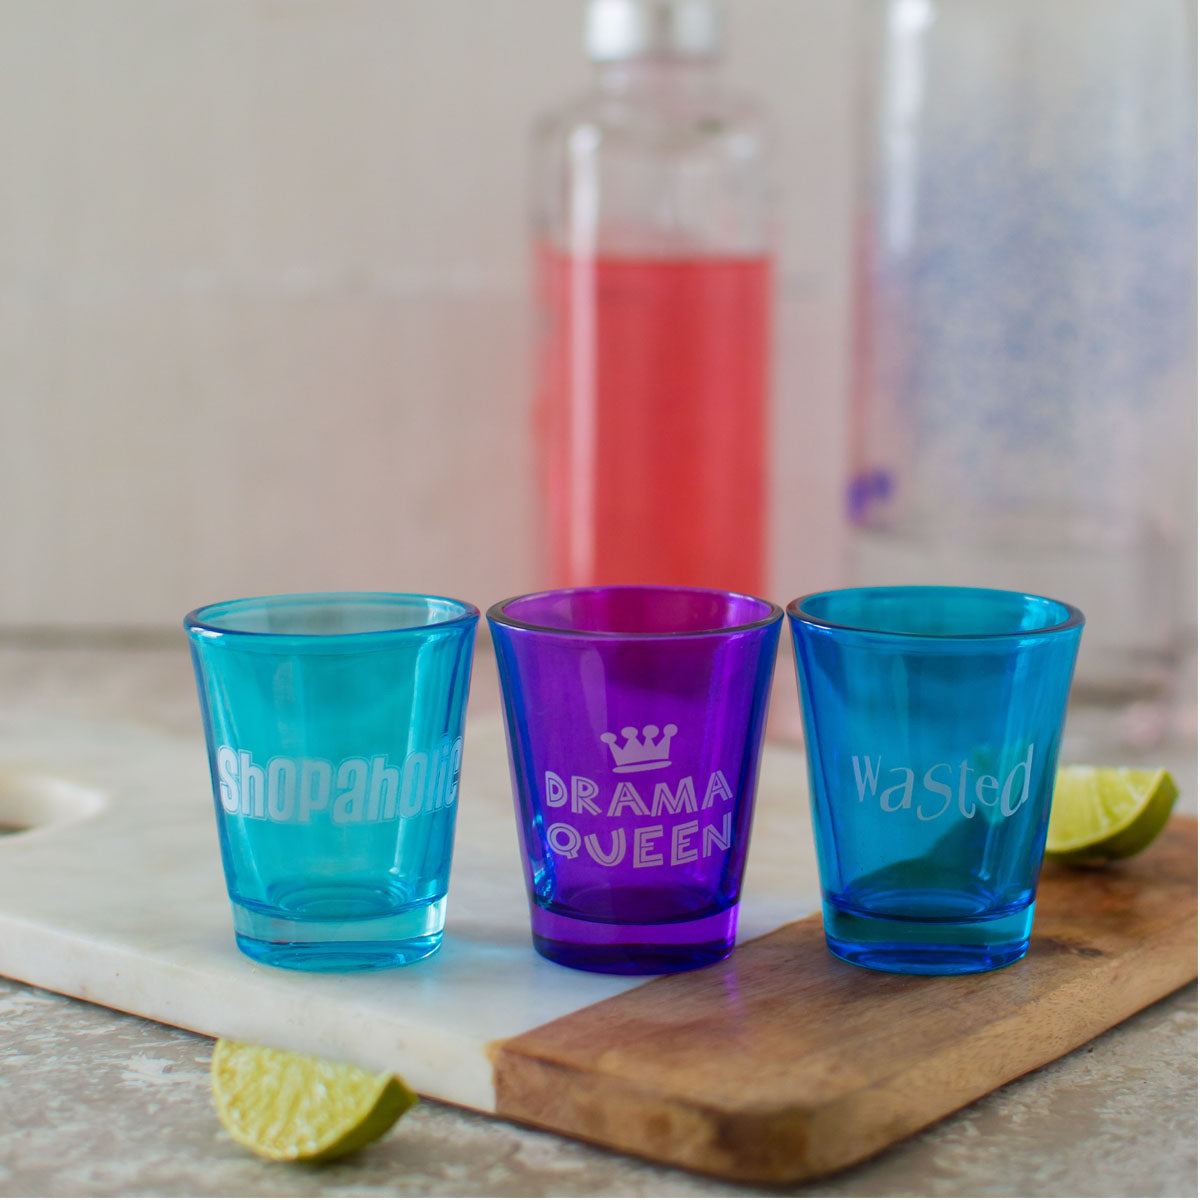 Shot Glasses - Set of 3 (Wasted/Shopaholic/Drama Queen)